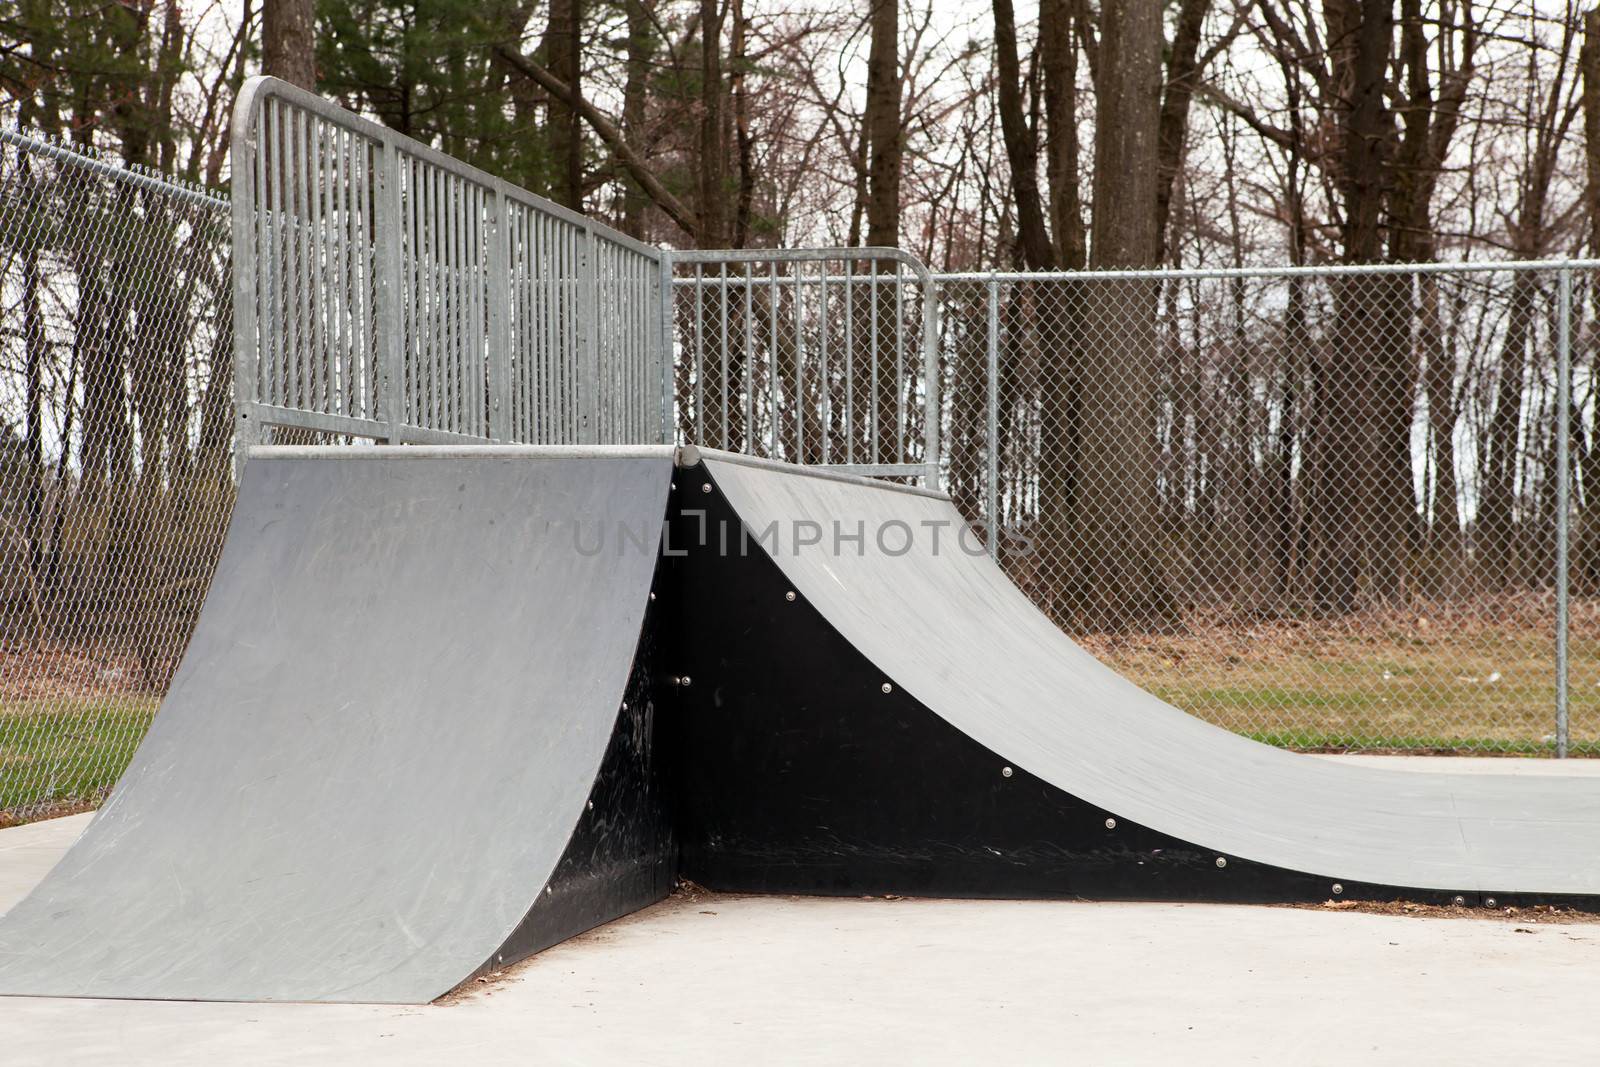 An empty set of ramps at an outdoor skate park.